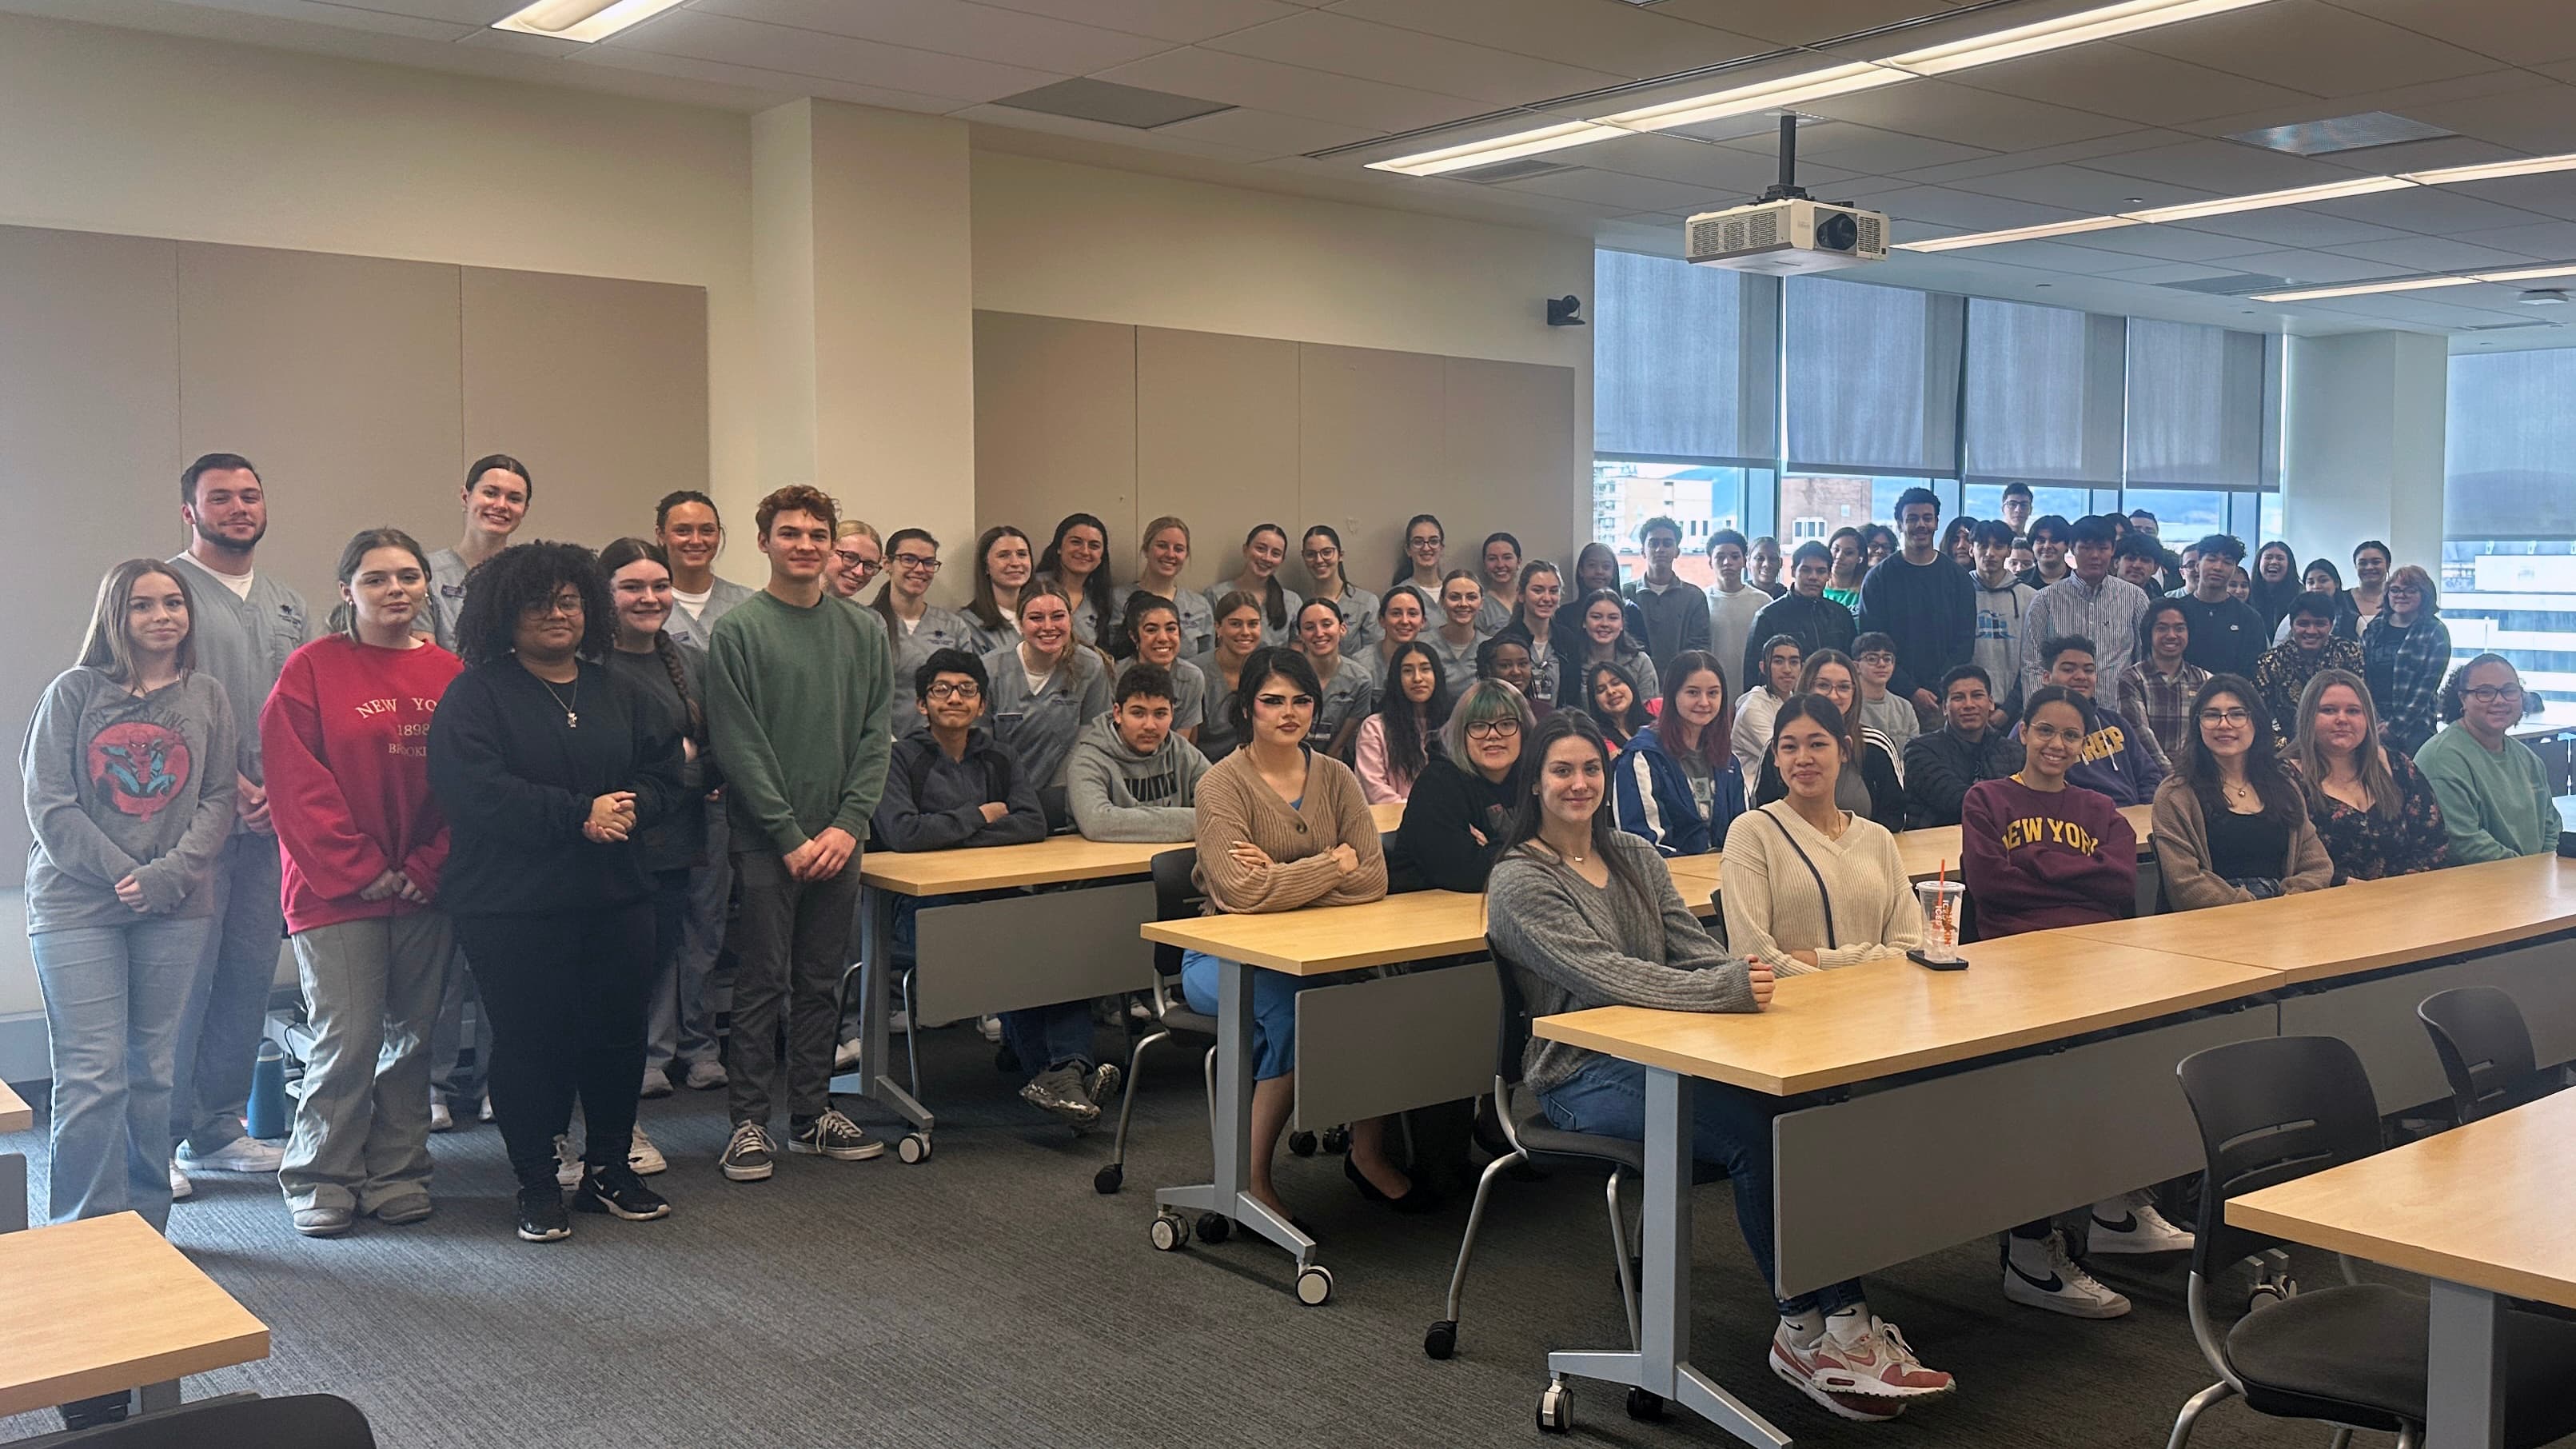 At the University of Scranton's Leahy College of Health Sciences on April 6, undergraduate nursing students hosted University of Success participants, shown, for a presentation on the nursing profession. The University of Success is a free, four-year, pre-college mentoring program for area students currently in eighth grade.